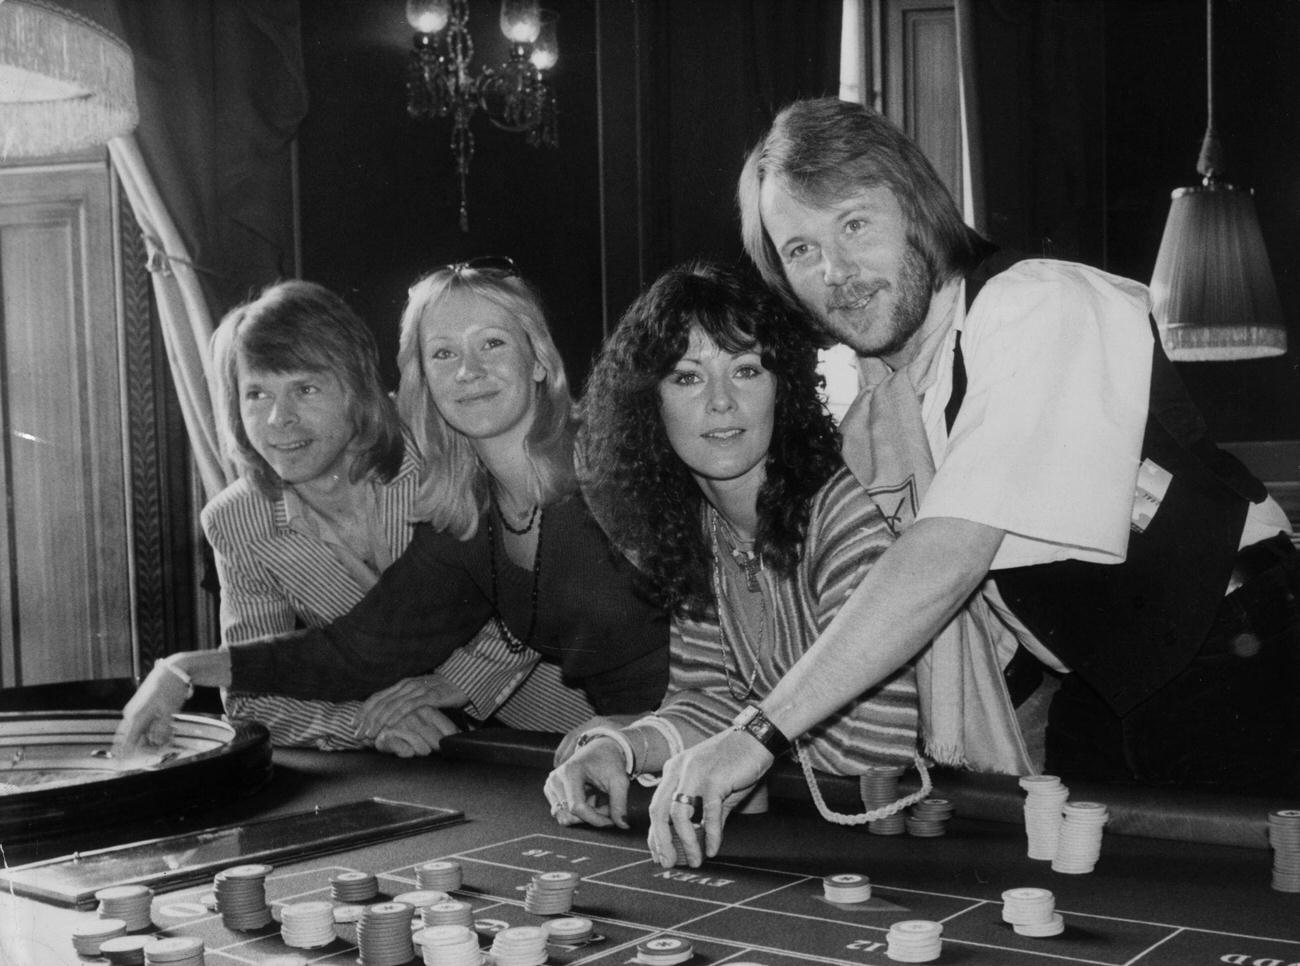 ABBA try their luck at a Crockford's roulette table whilst attending the premiere of their latest film 'ABBA - The Movie' in London.